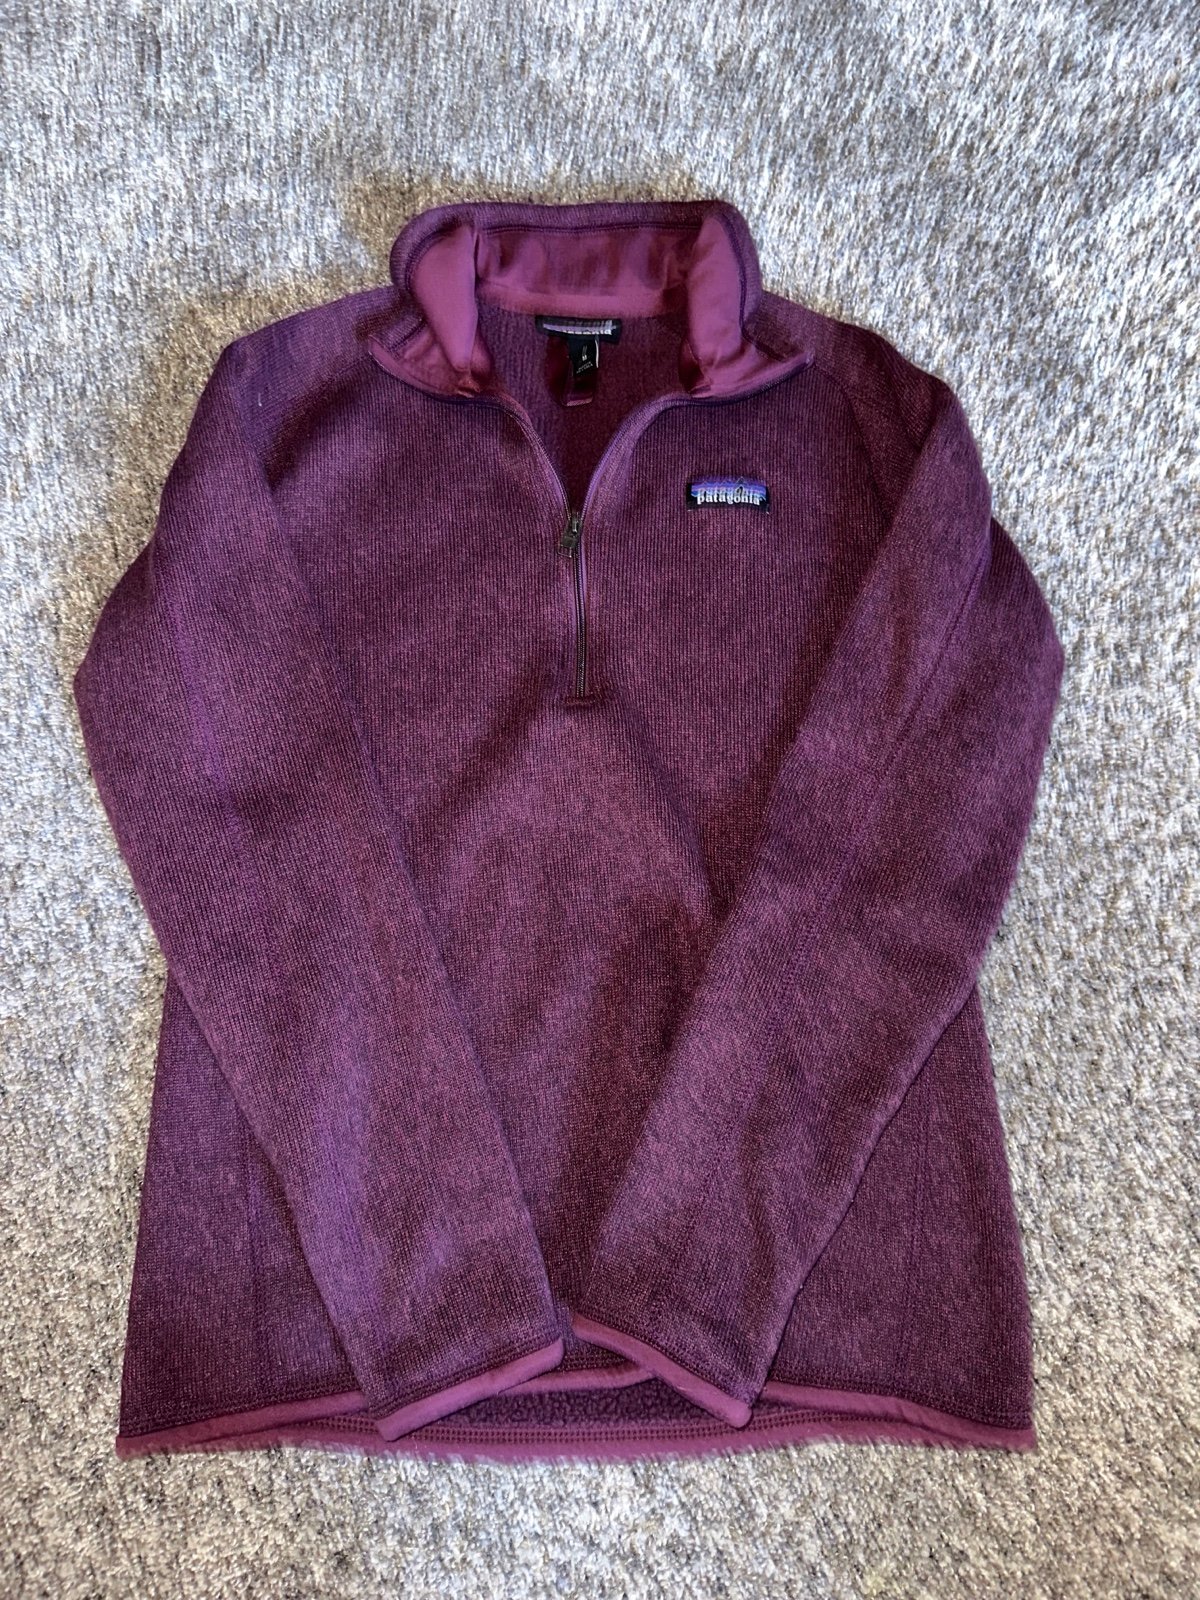 Special offer  Patagonia better sweater 1/4 zip hV6UwOk